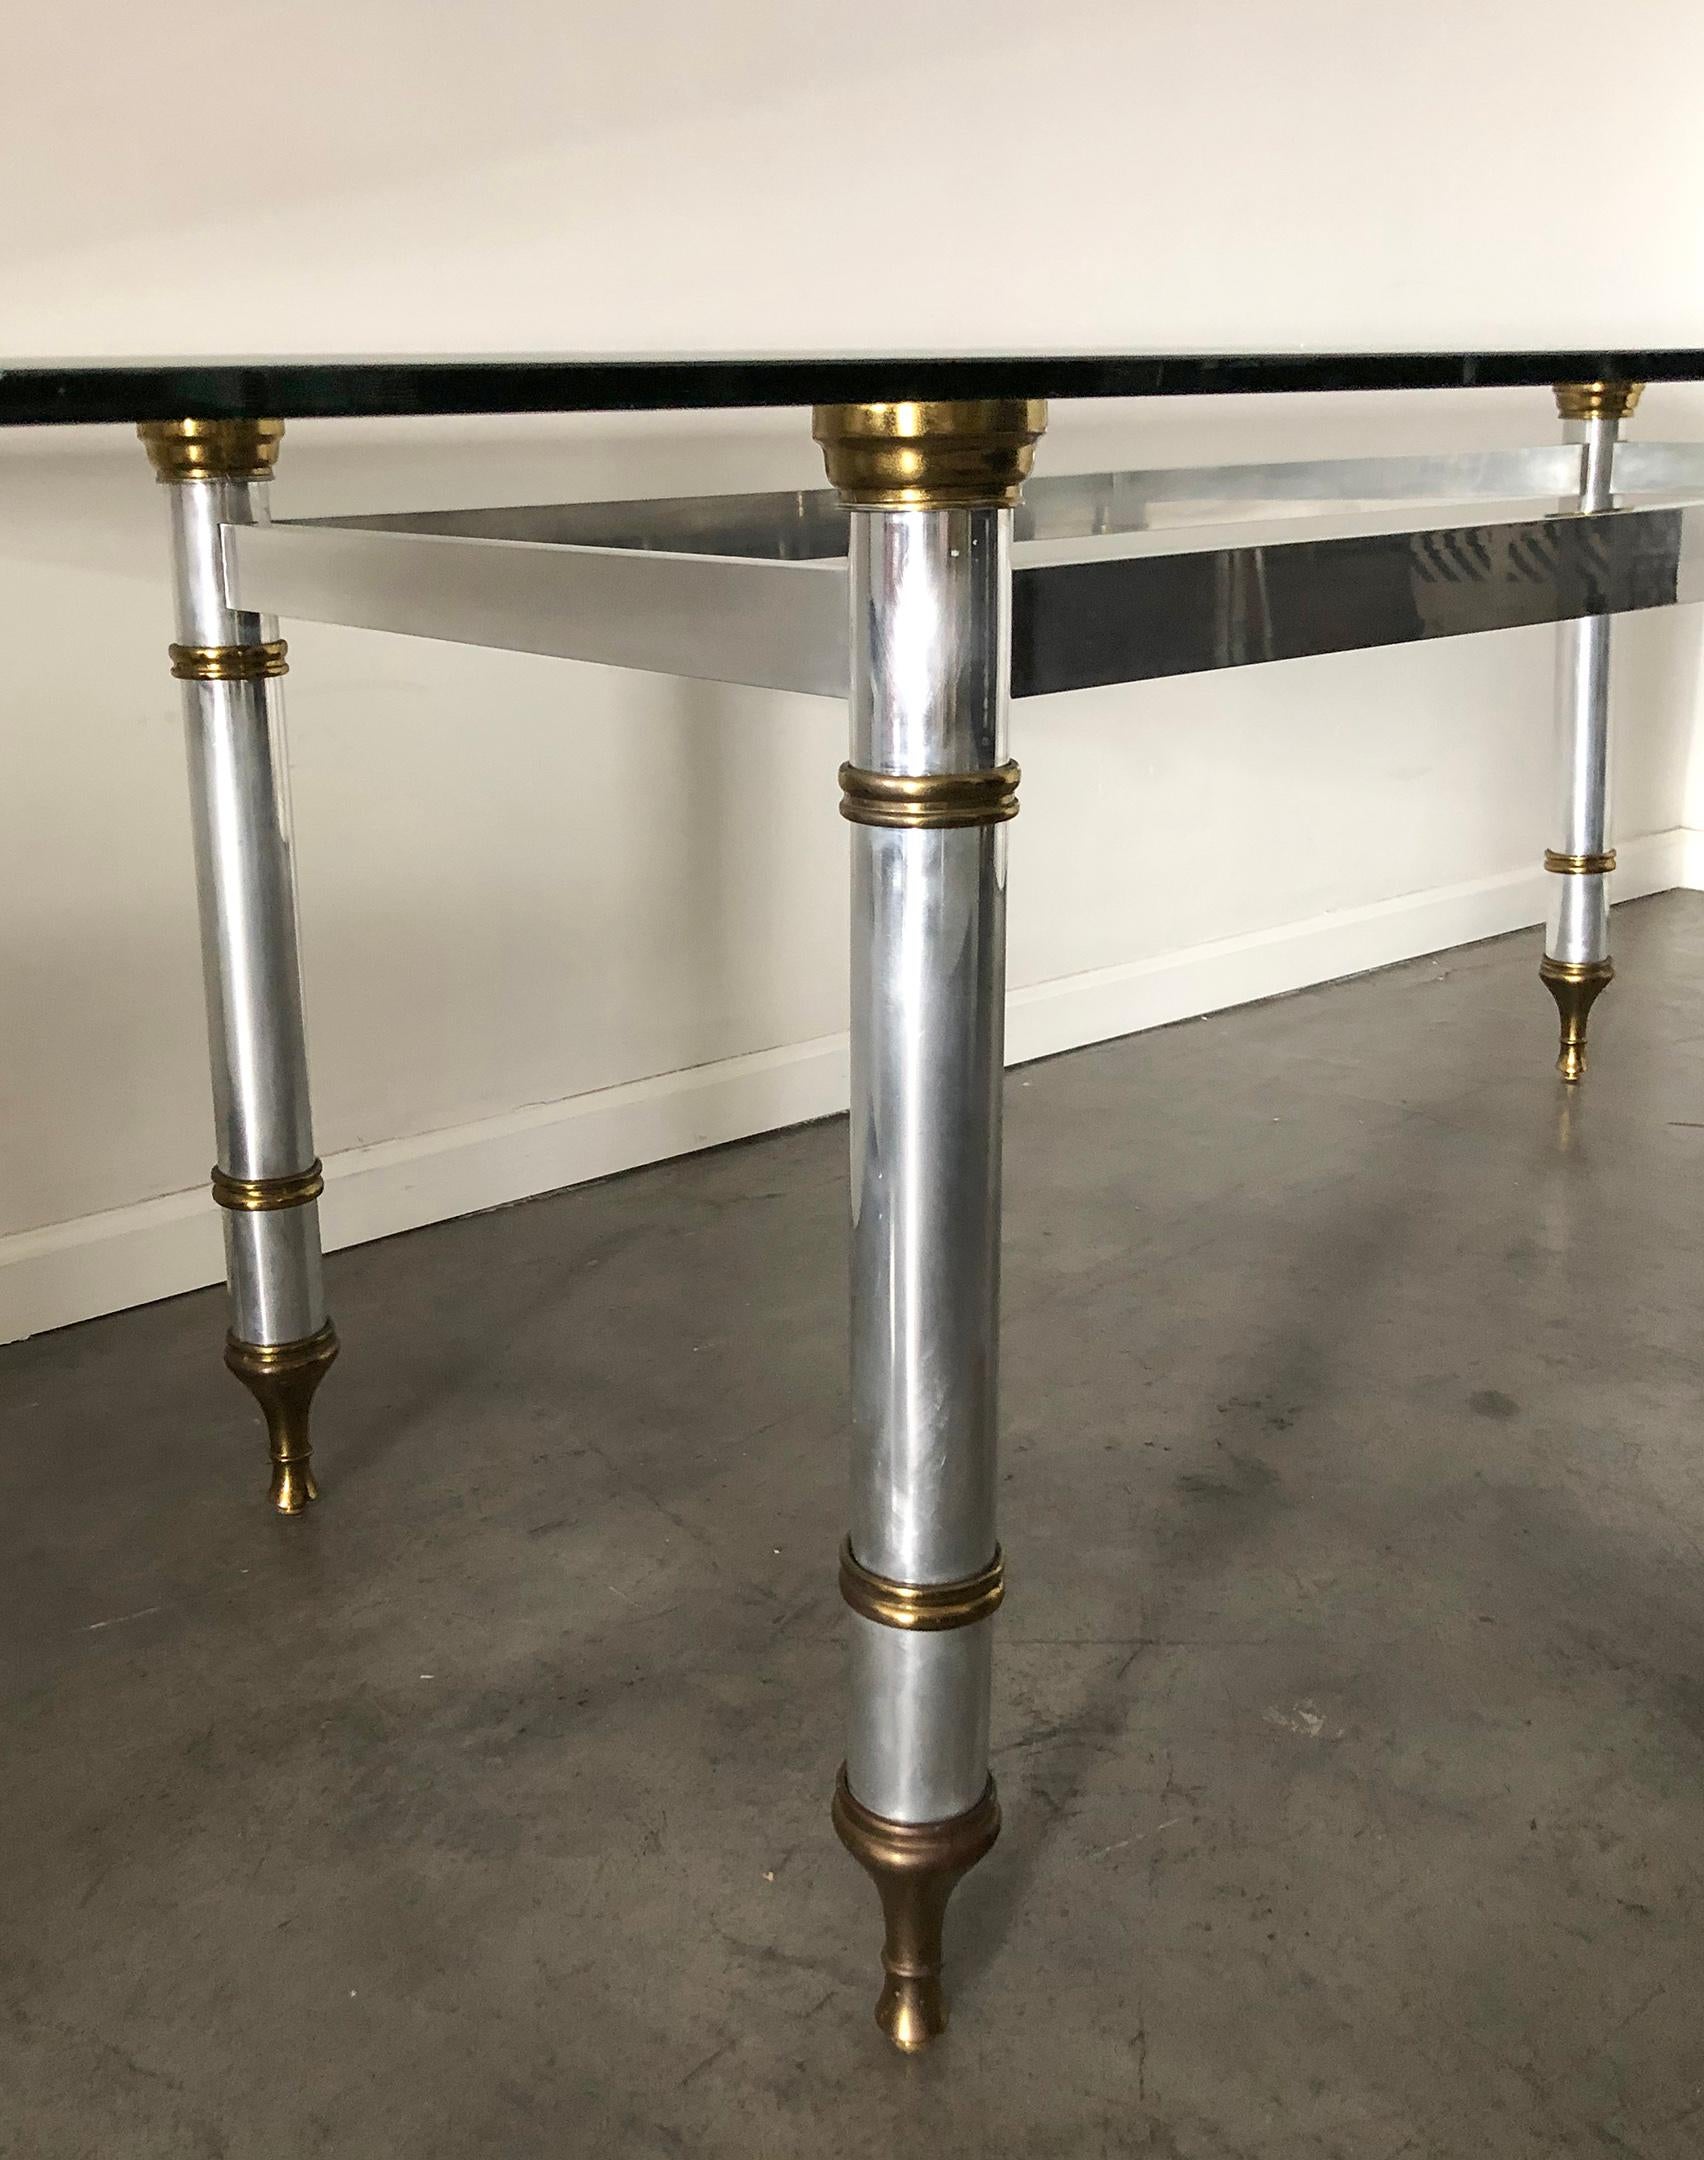 A 1960s steel and brass dining table. French designed Maison Jansen dining table exudes Hollywood regency and regency styling and is sure to compliment any fashionable environment.

This stunning table has such a modern look that it could